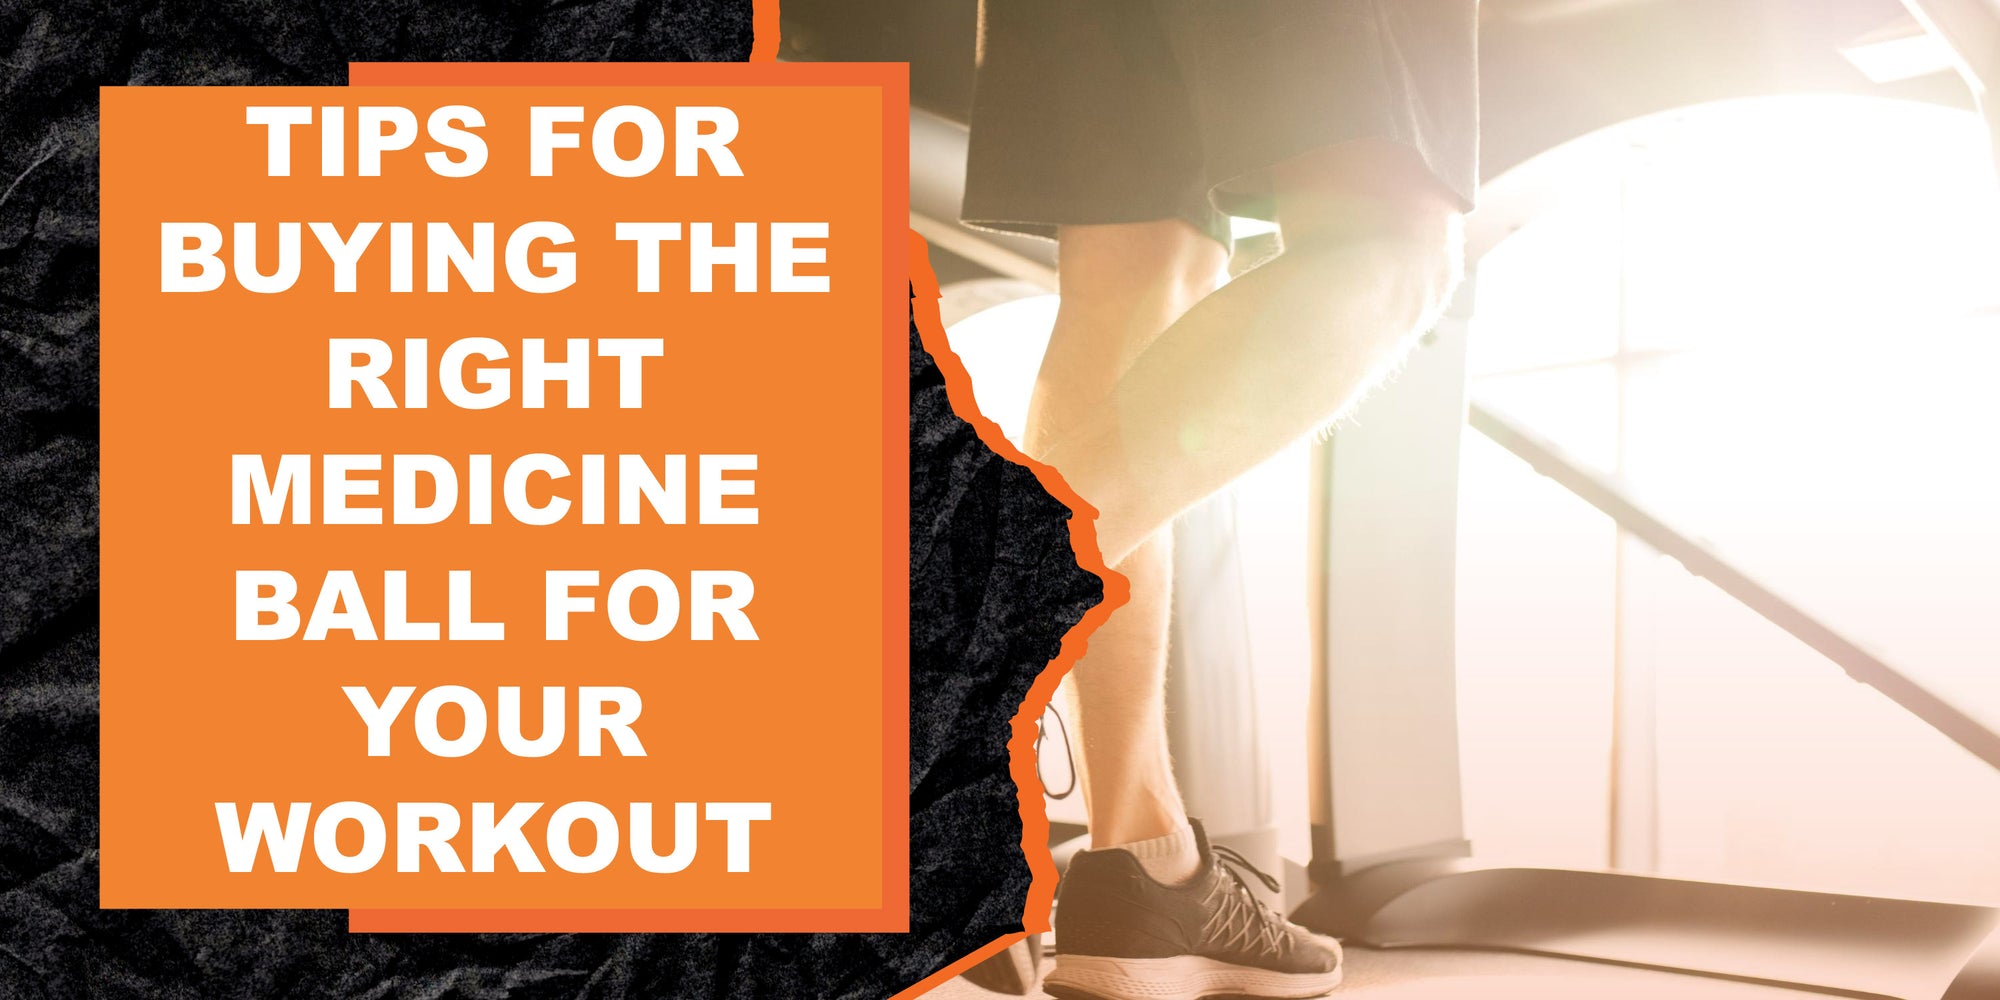 Tips for Buying the Right Medicine Ball for Your Workout Goals